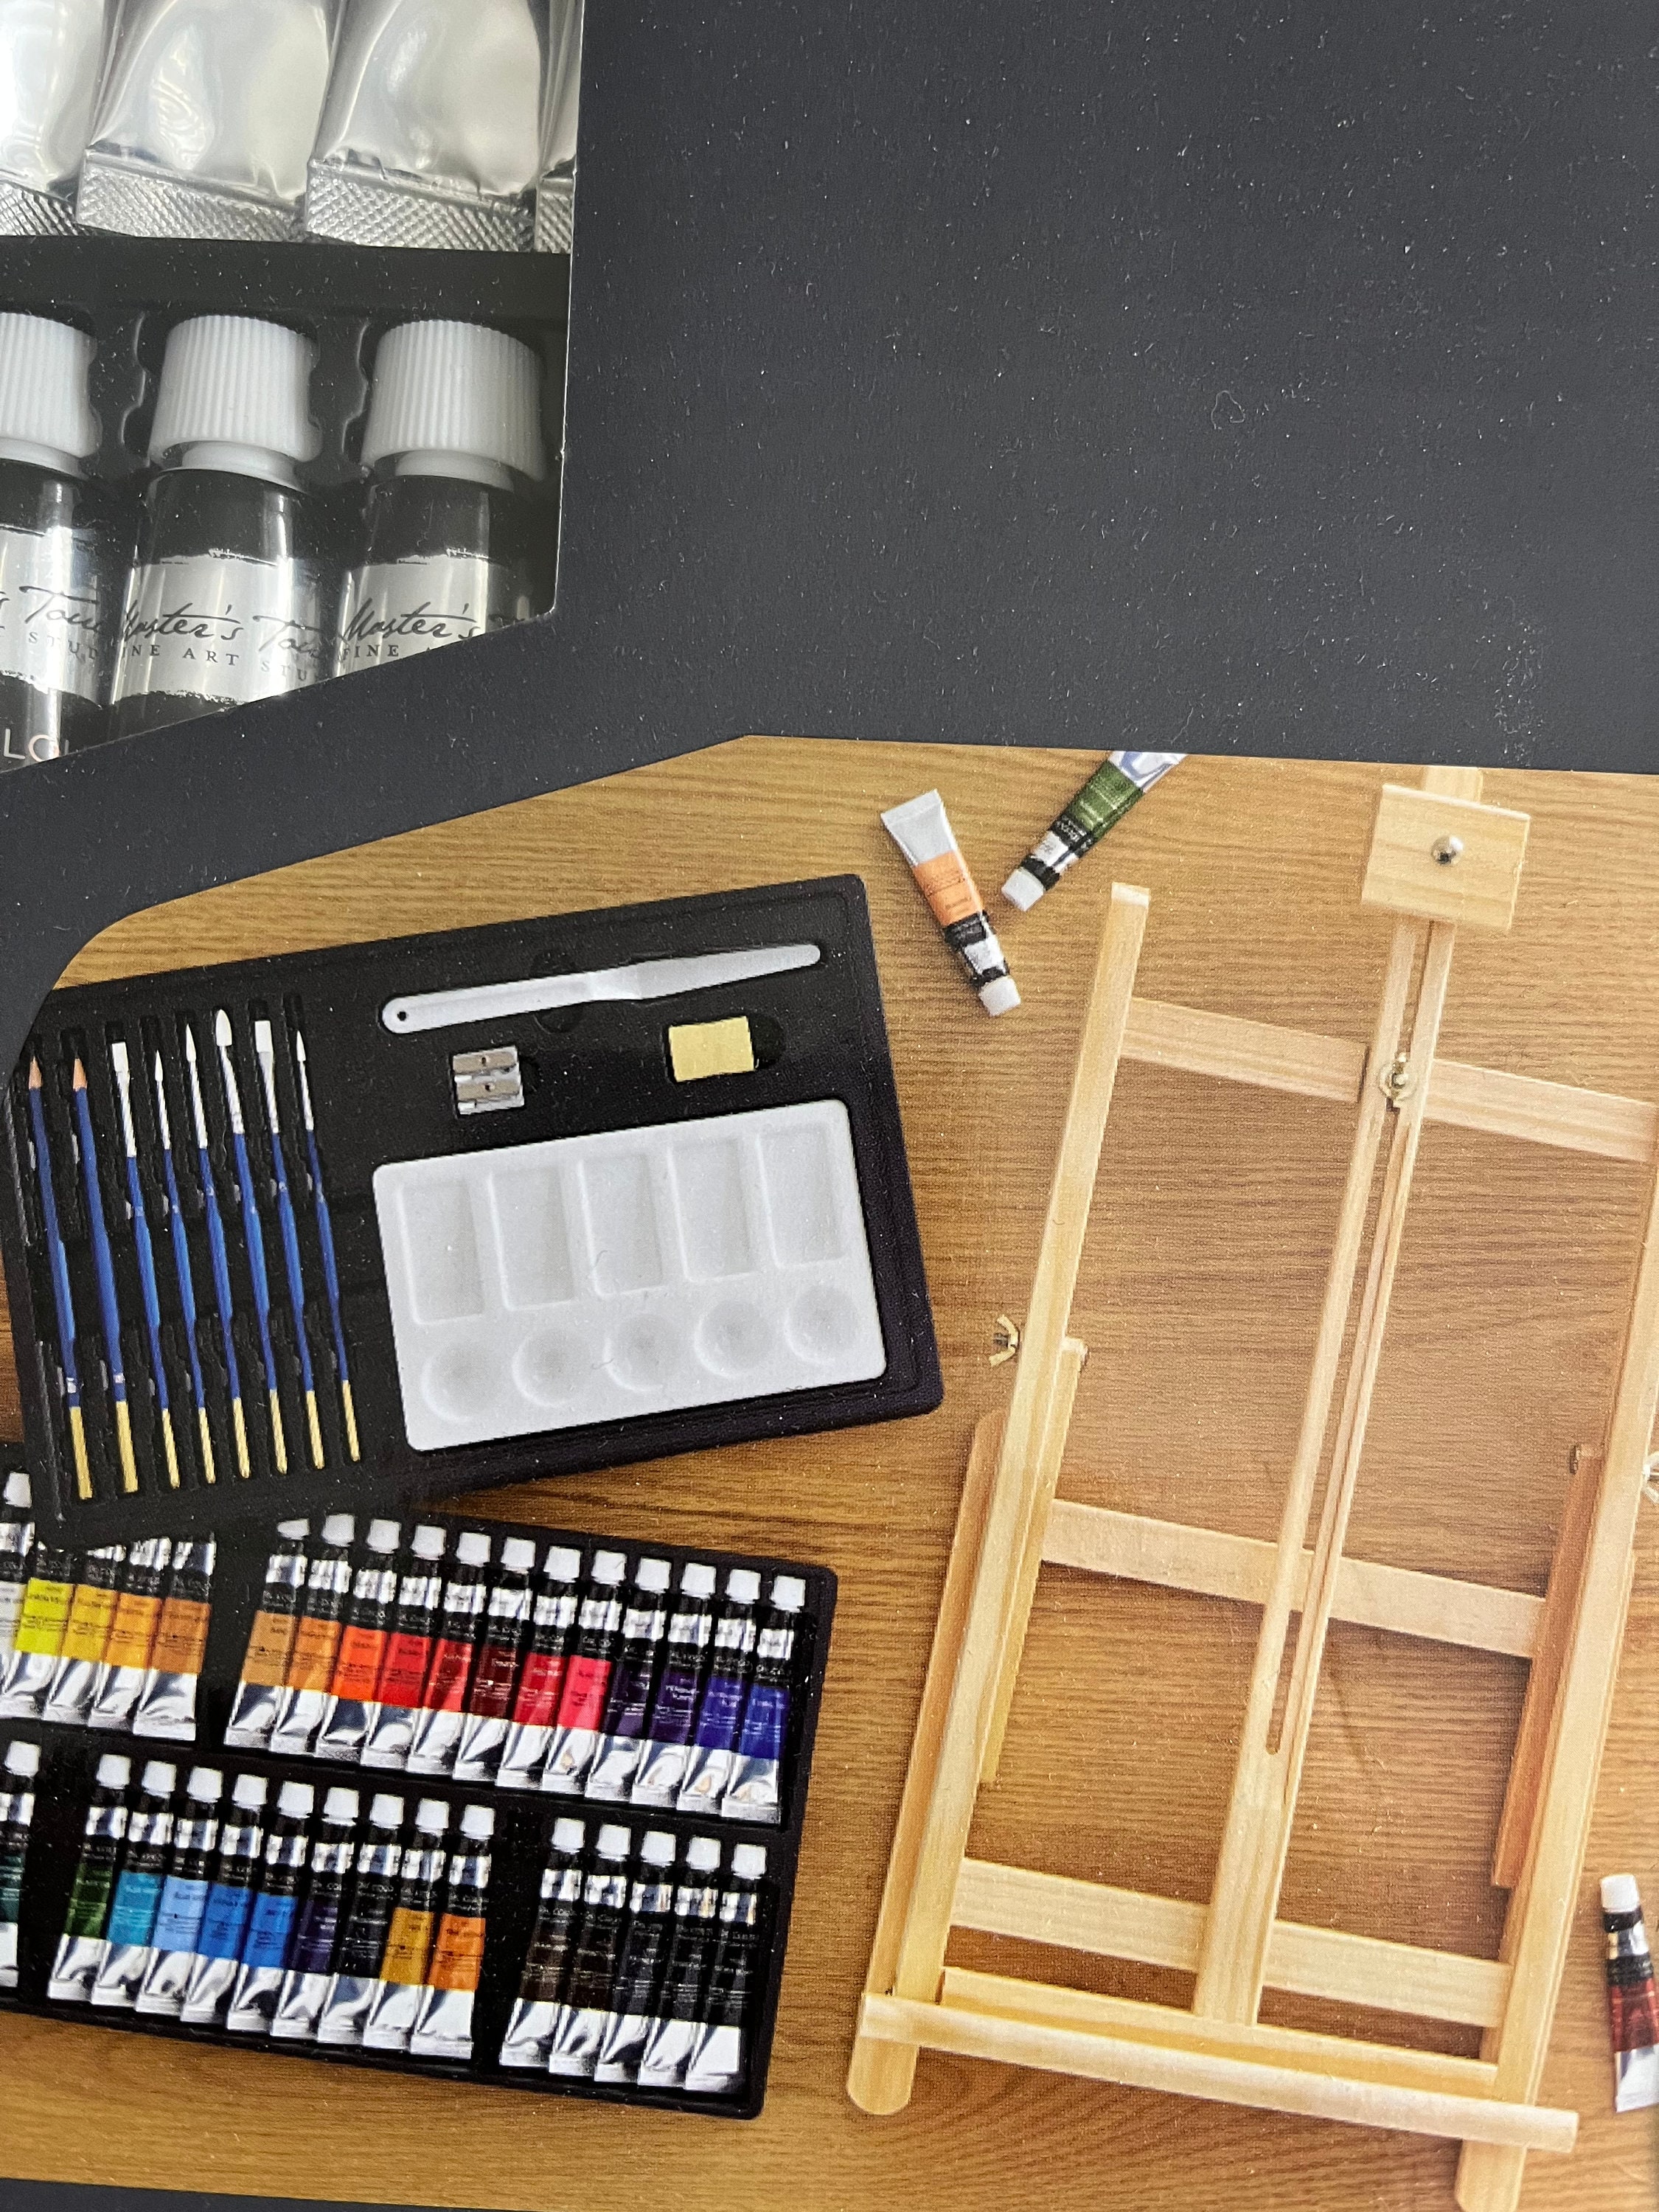 Art Supplies, 240-Piece Drawing Art kit, Gifts Art Set Case with Double  Sided Trifold Easel, Includes Oil Pastels, Crayons, Colored Pencils,  Watercolor Cakes, Sketch Pad (BLACK) 